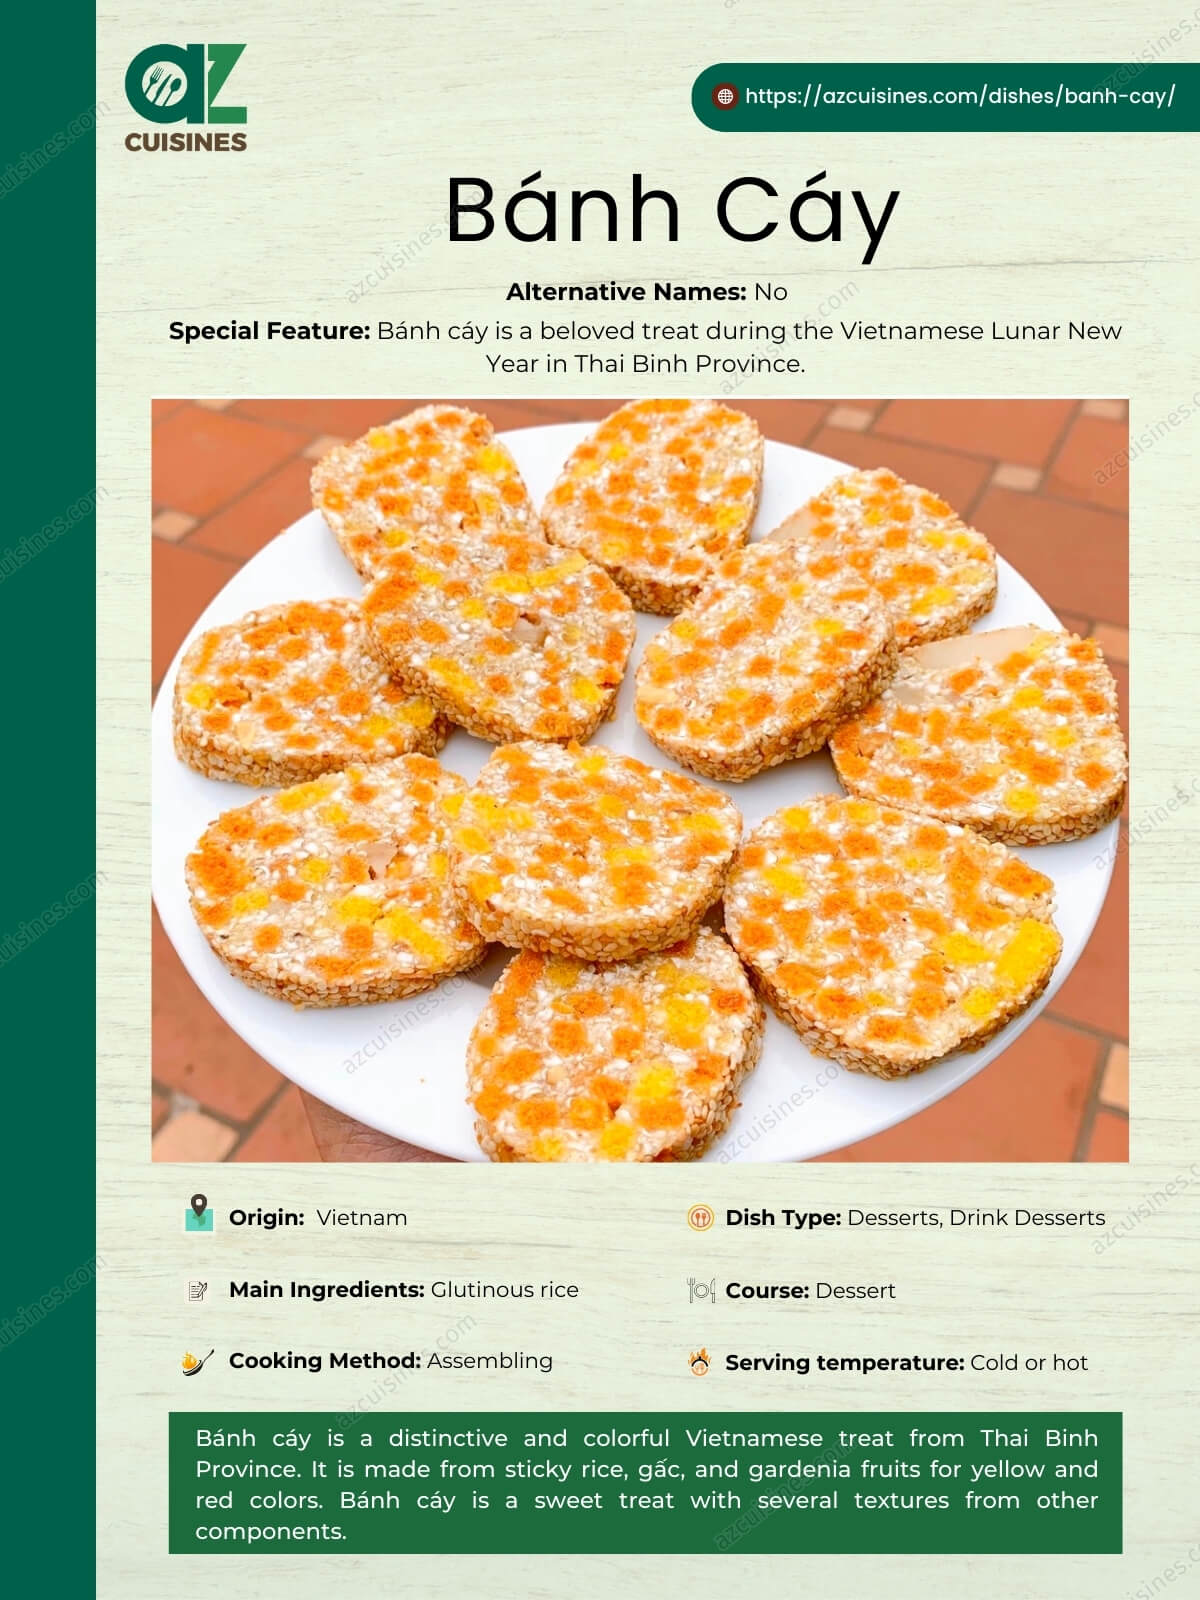 Banh Cay Overview